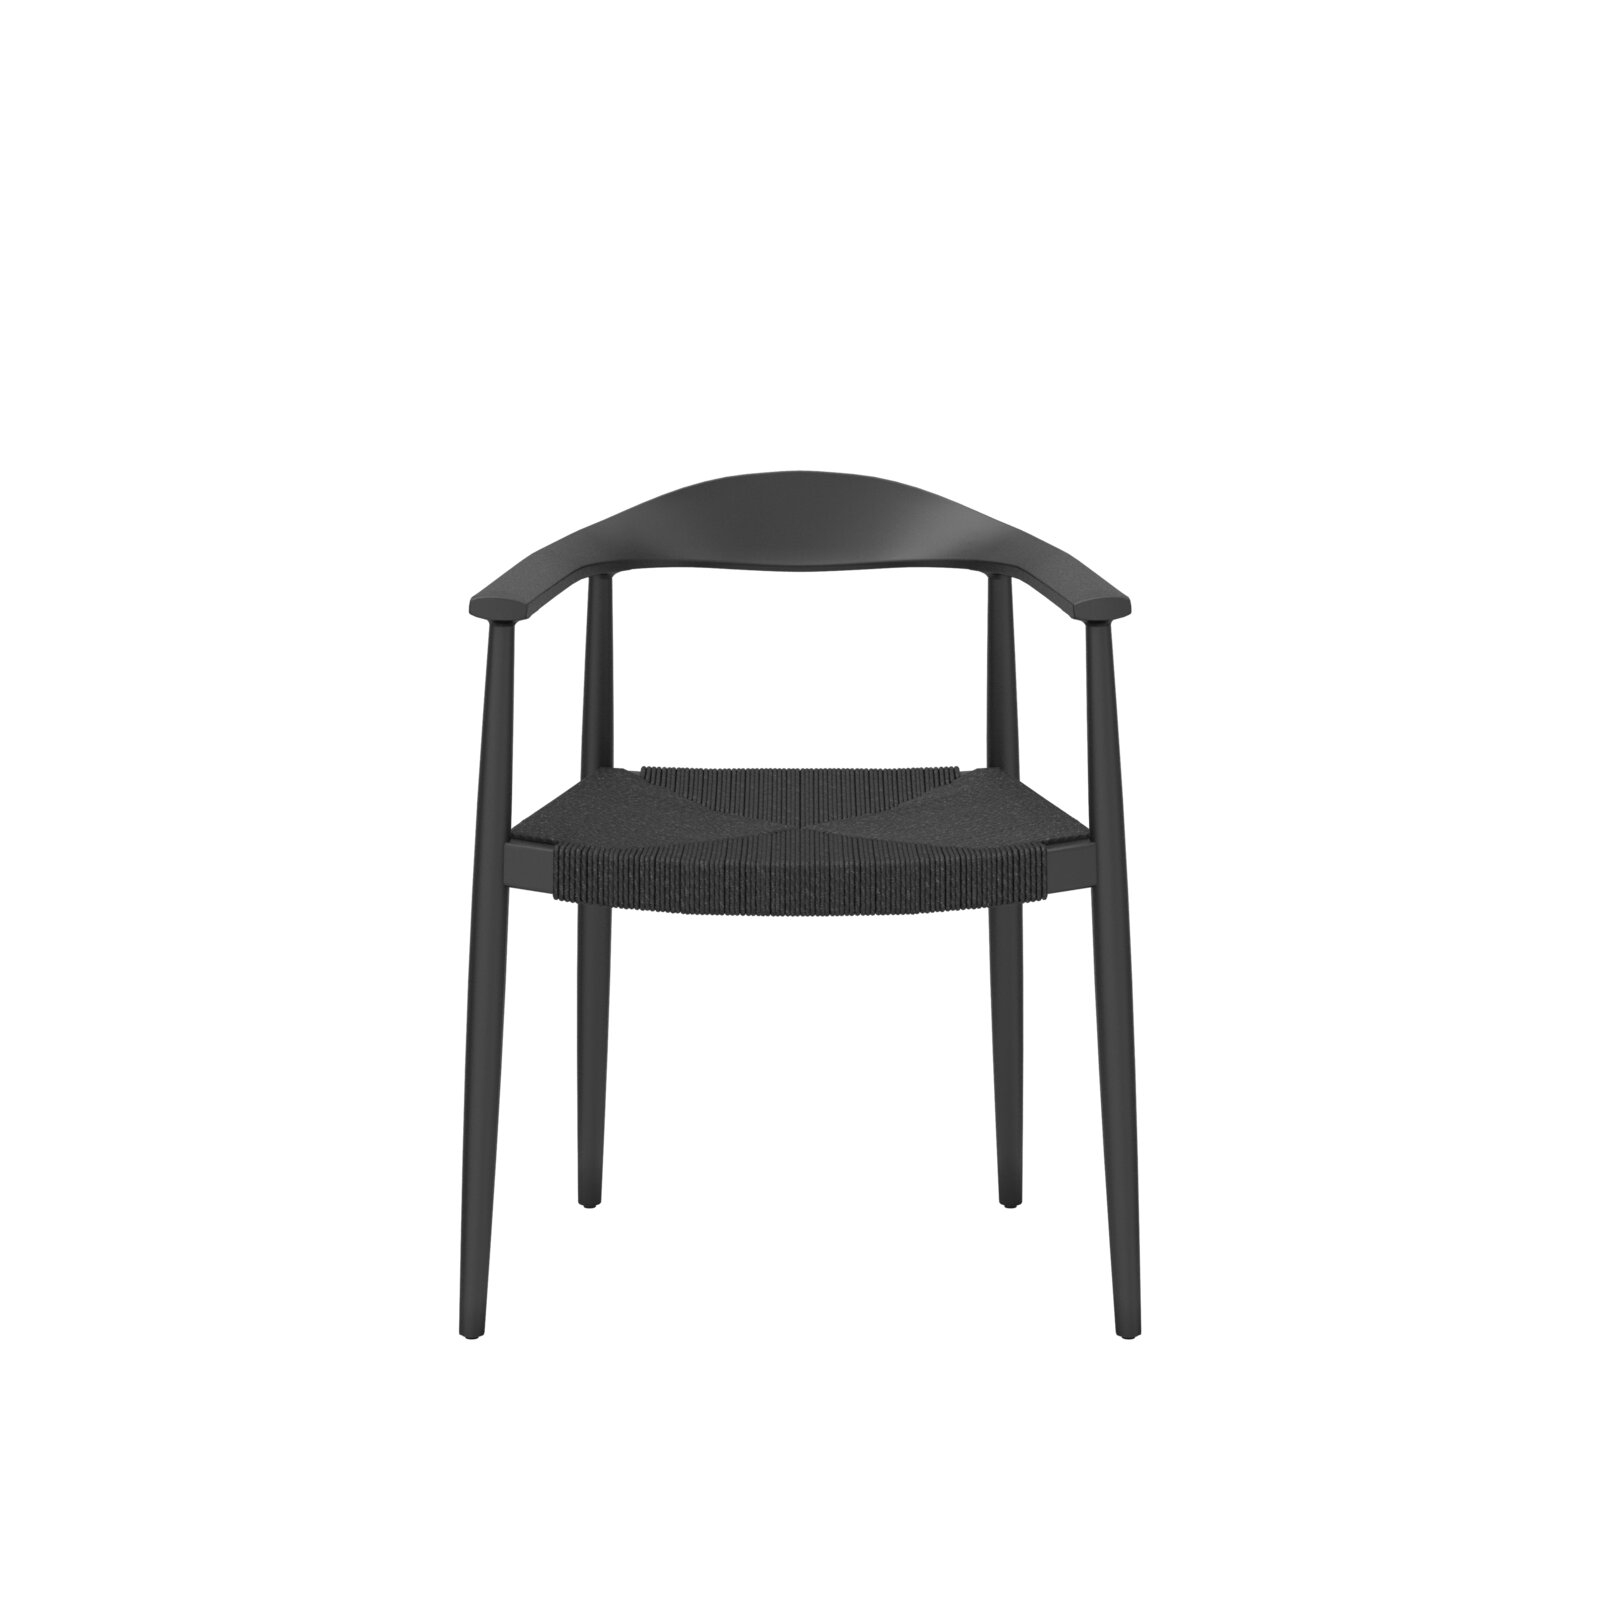 Milam Wishbone Wooden Guest Chair by Etc. - Image 1